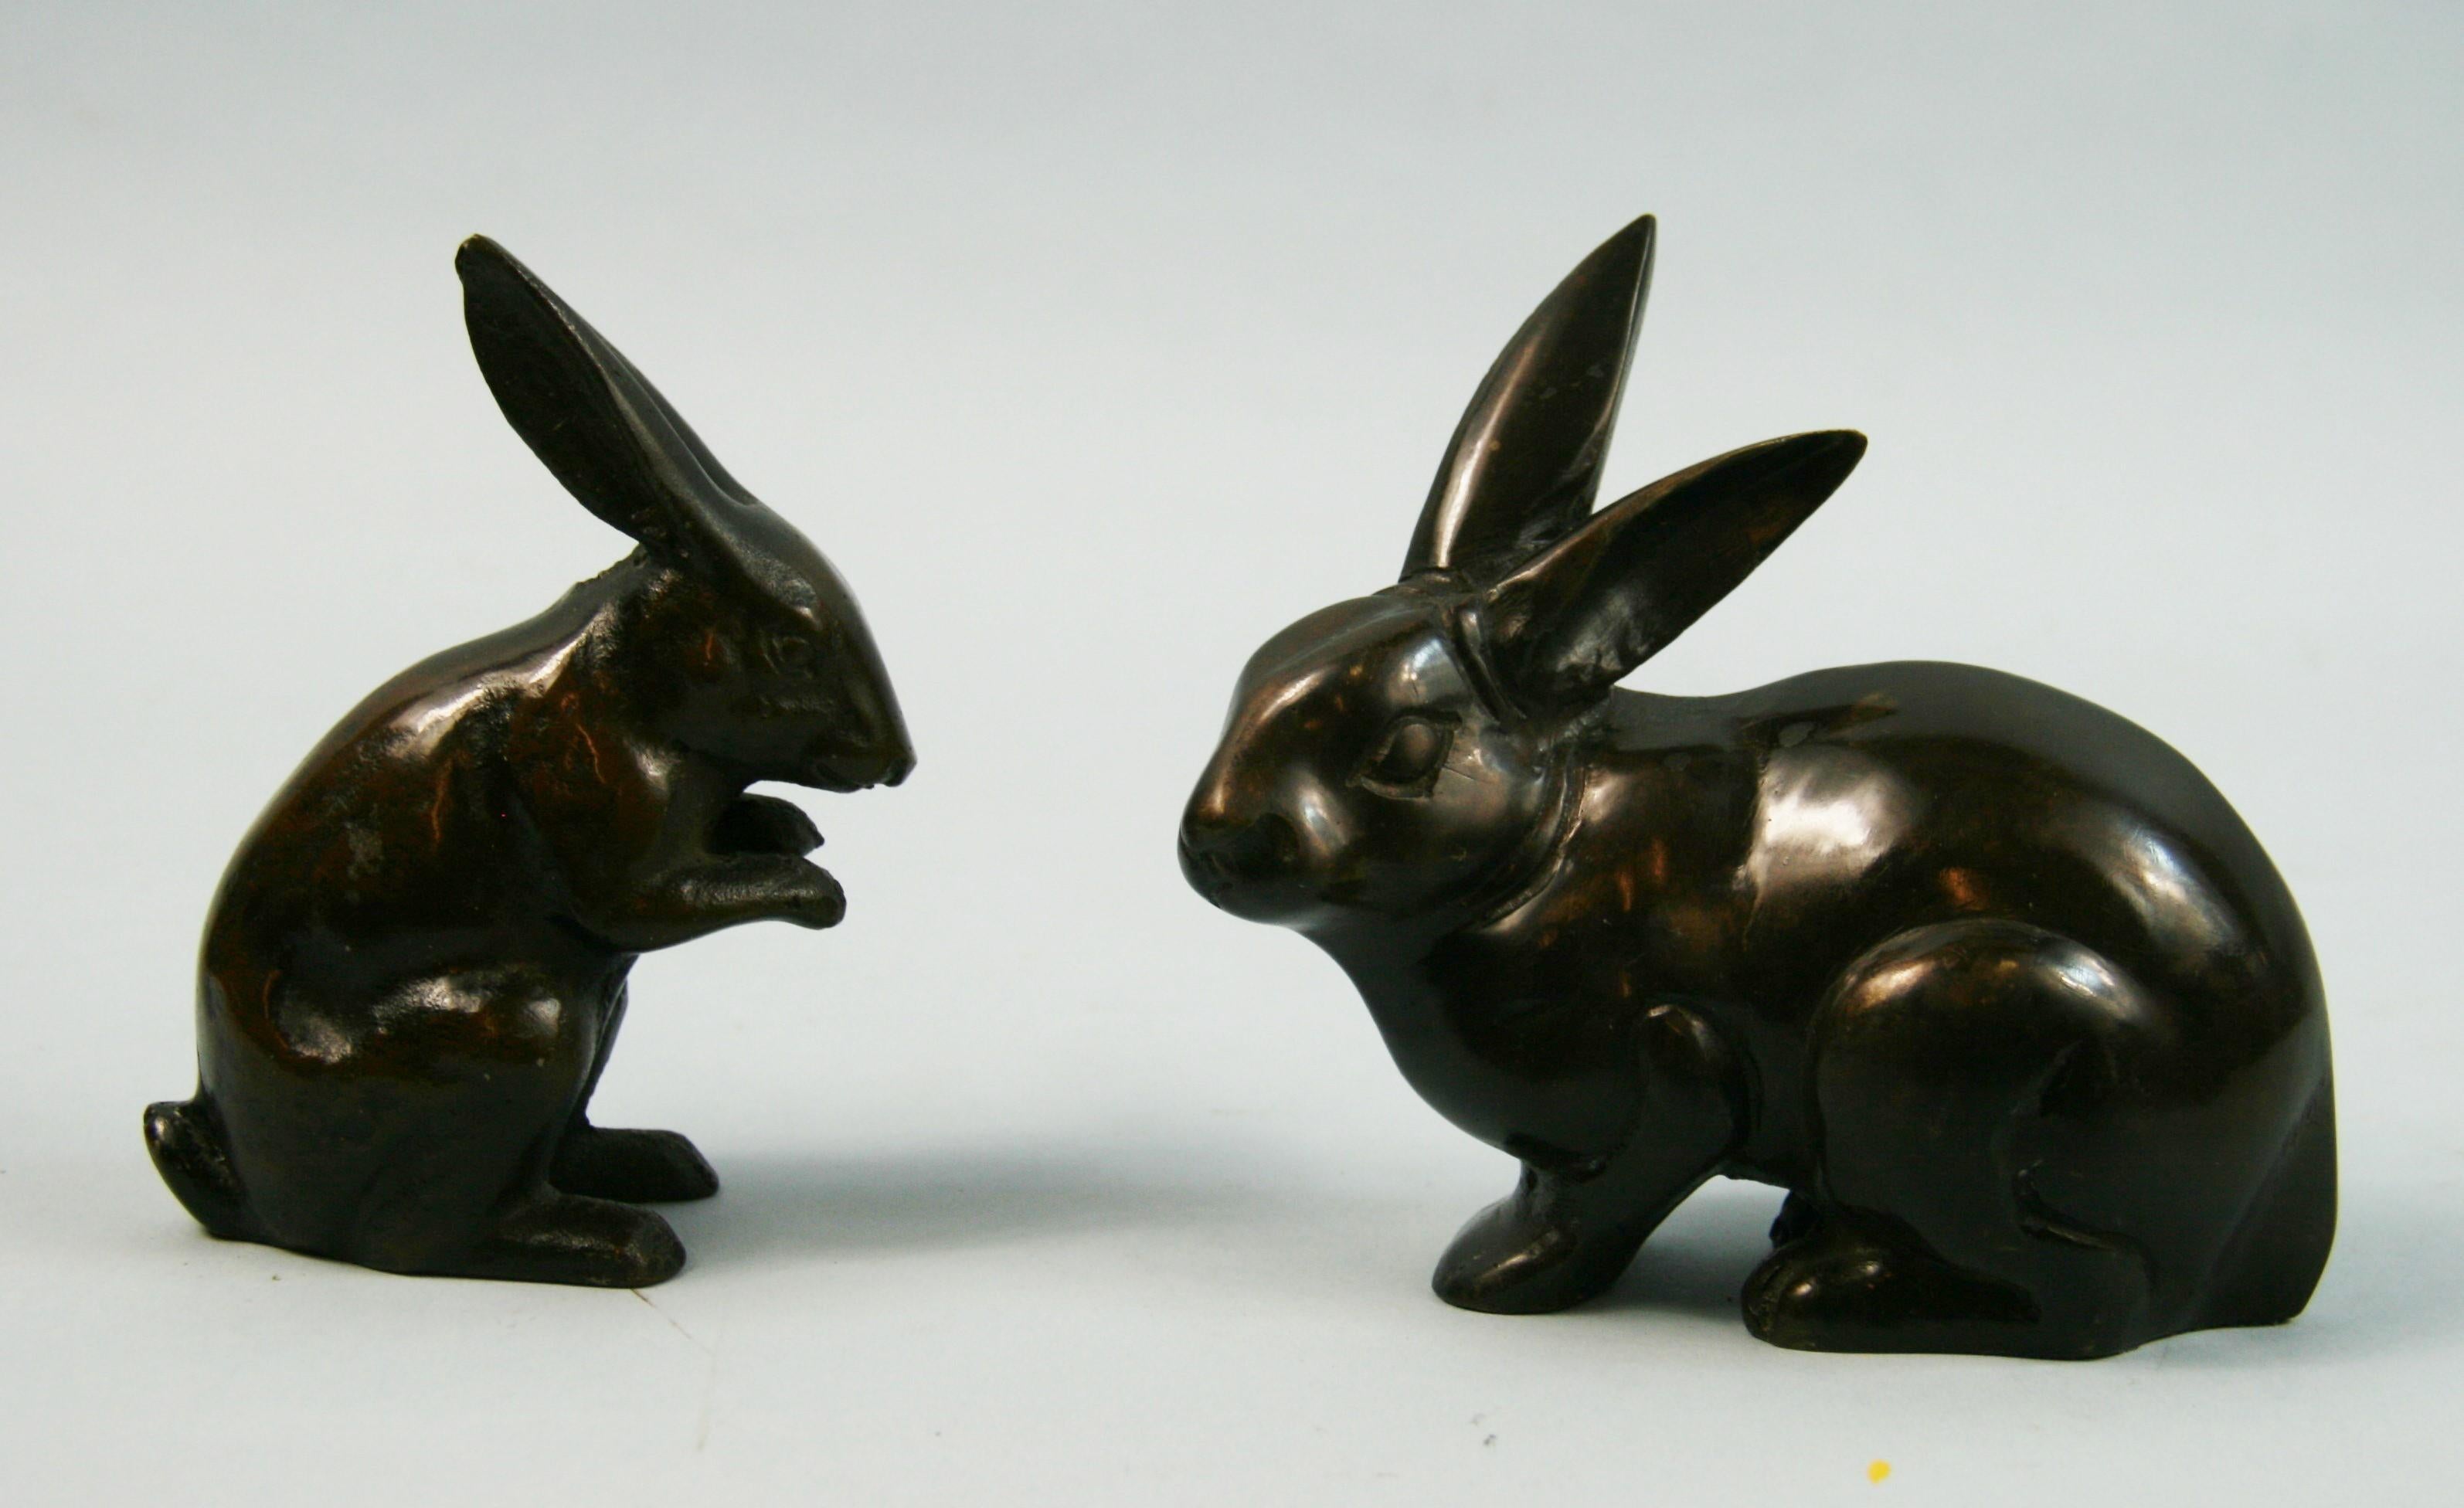 3-718 pair hand cast Japanese rabbits on is sold the other is hollow
Old Japanese label on bottom .
Measures: Tallest 5